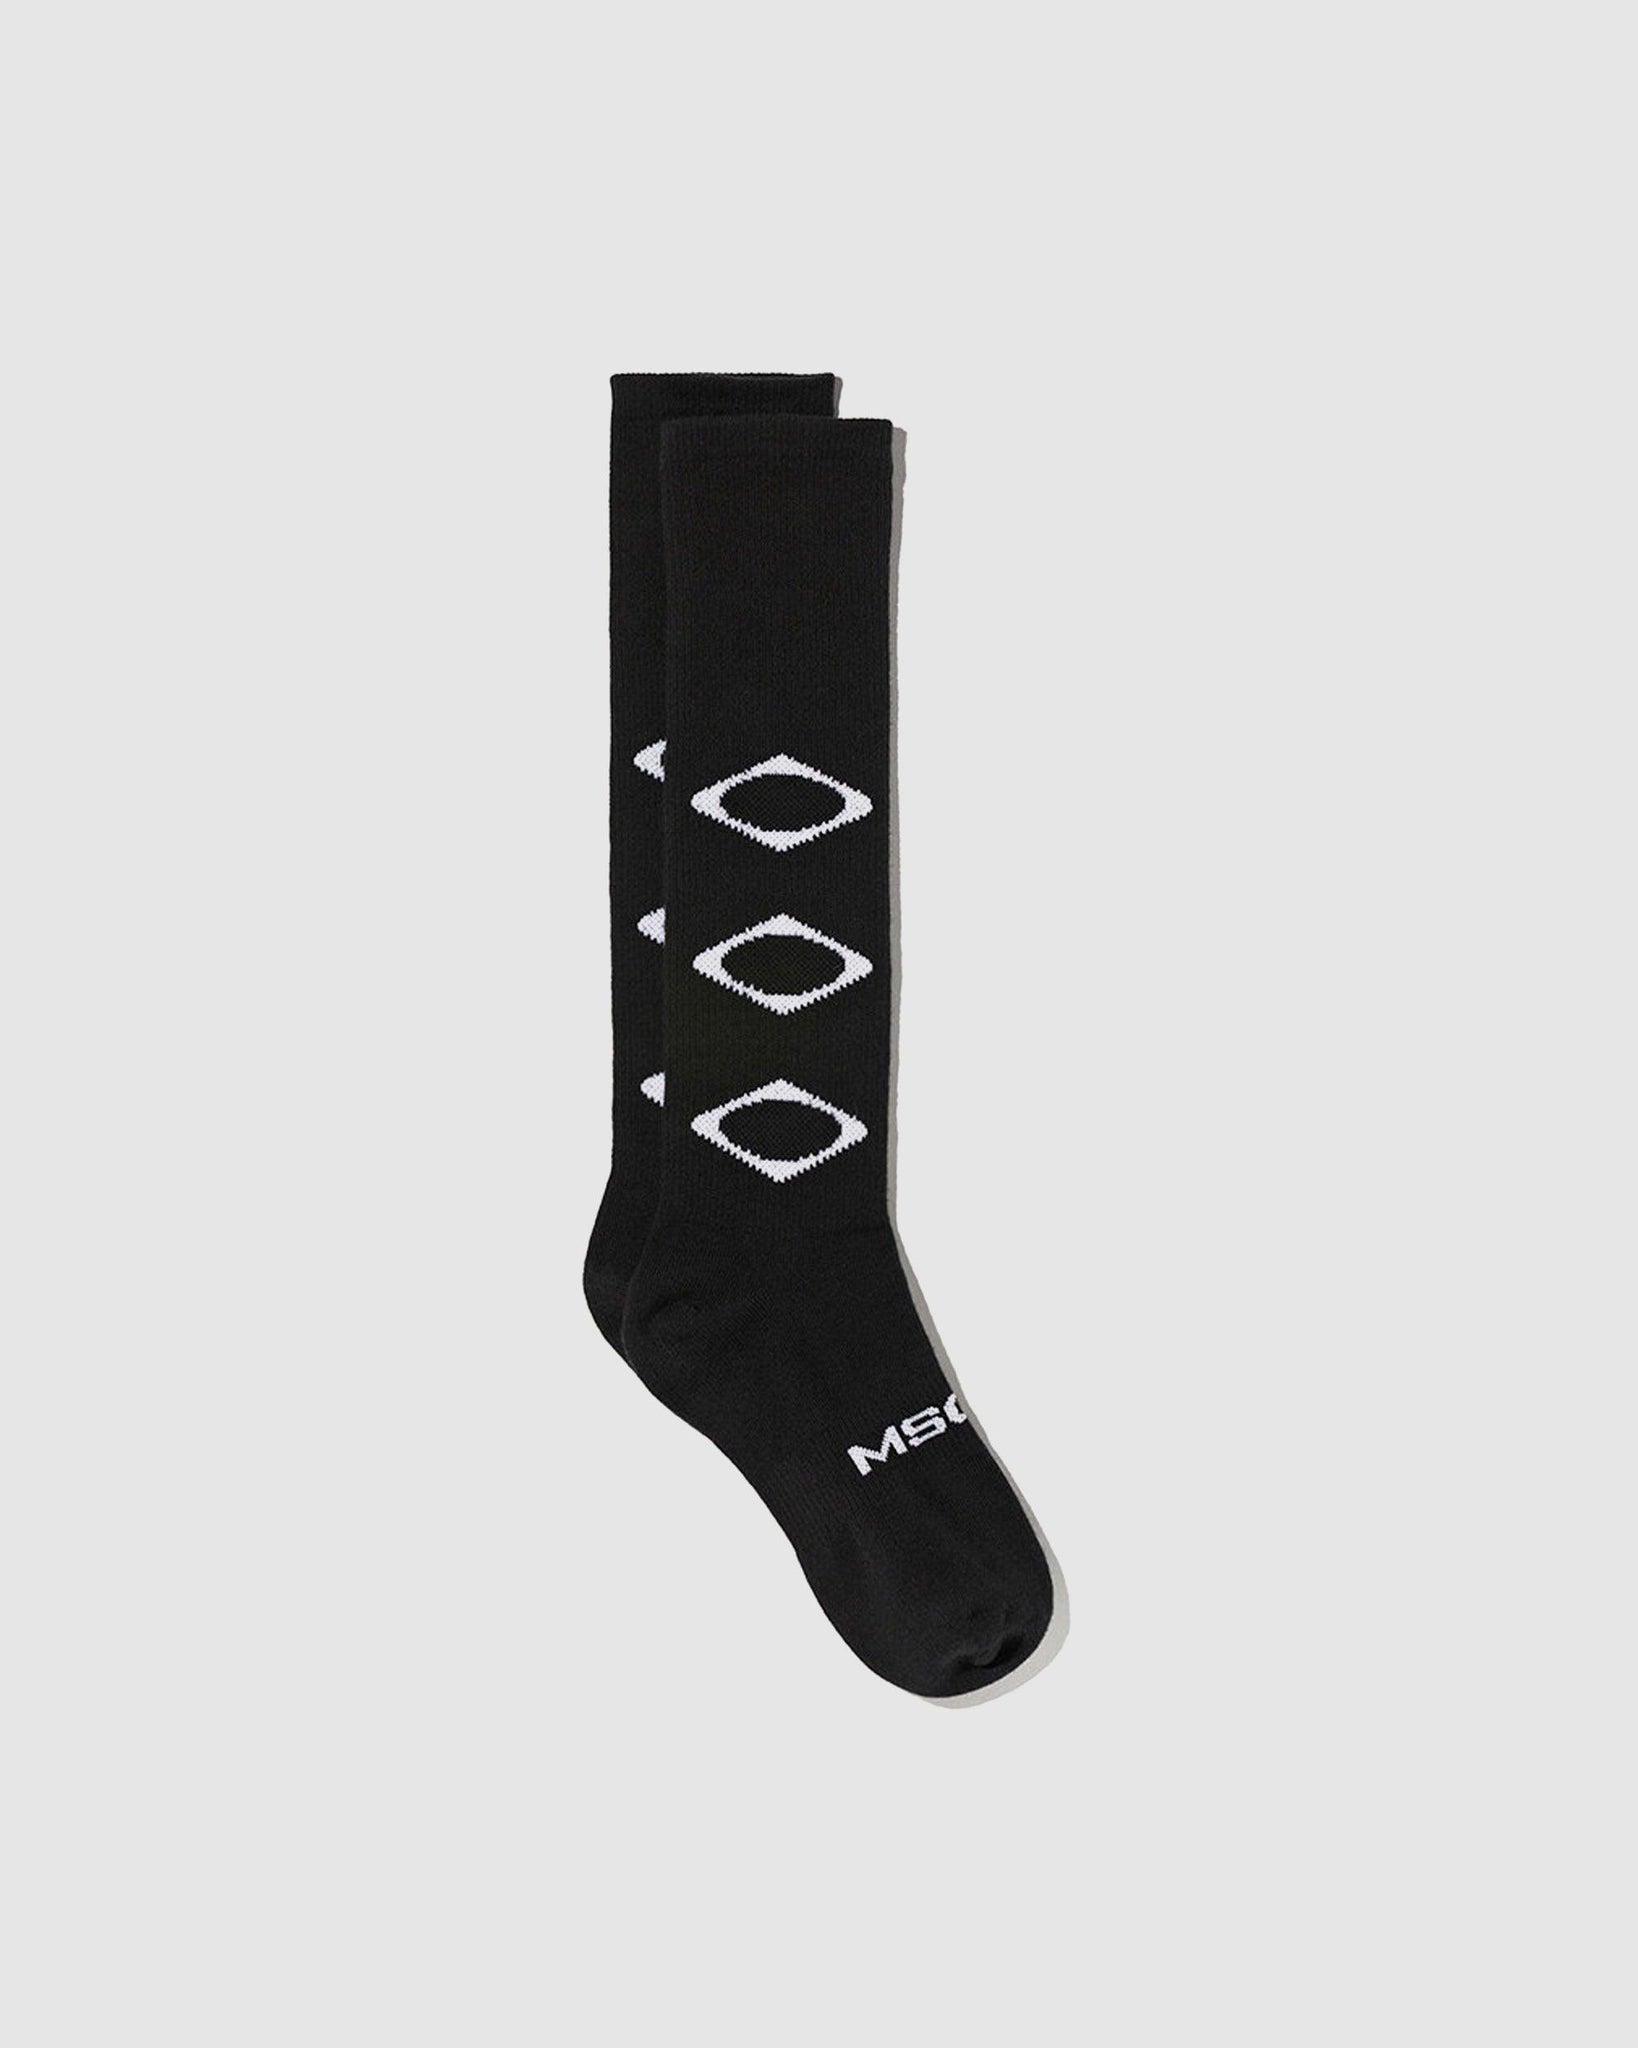 Rhombus Knee Socks Black - {{ collection.title }} - Chinatown Country Club 